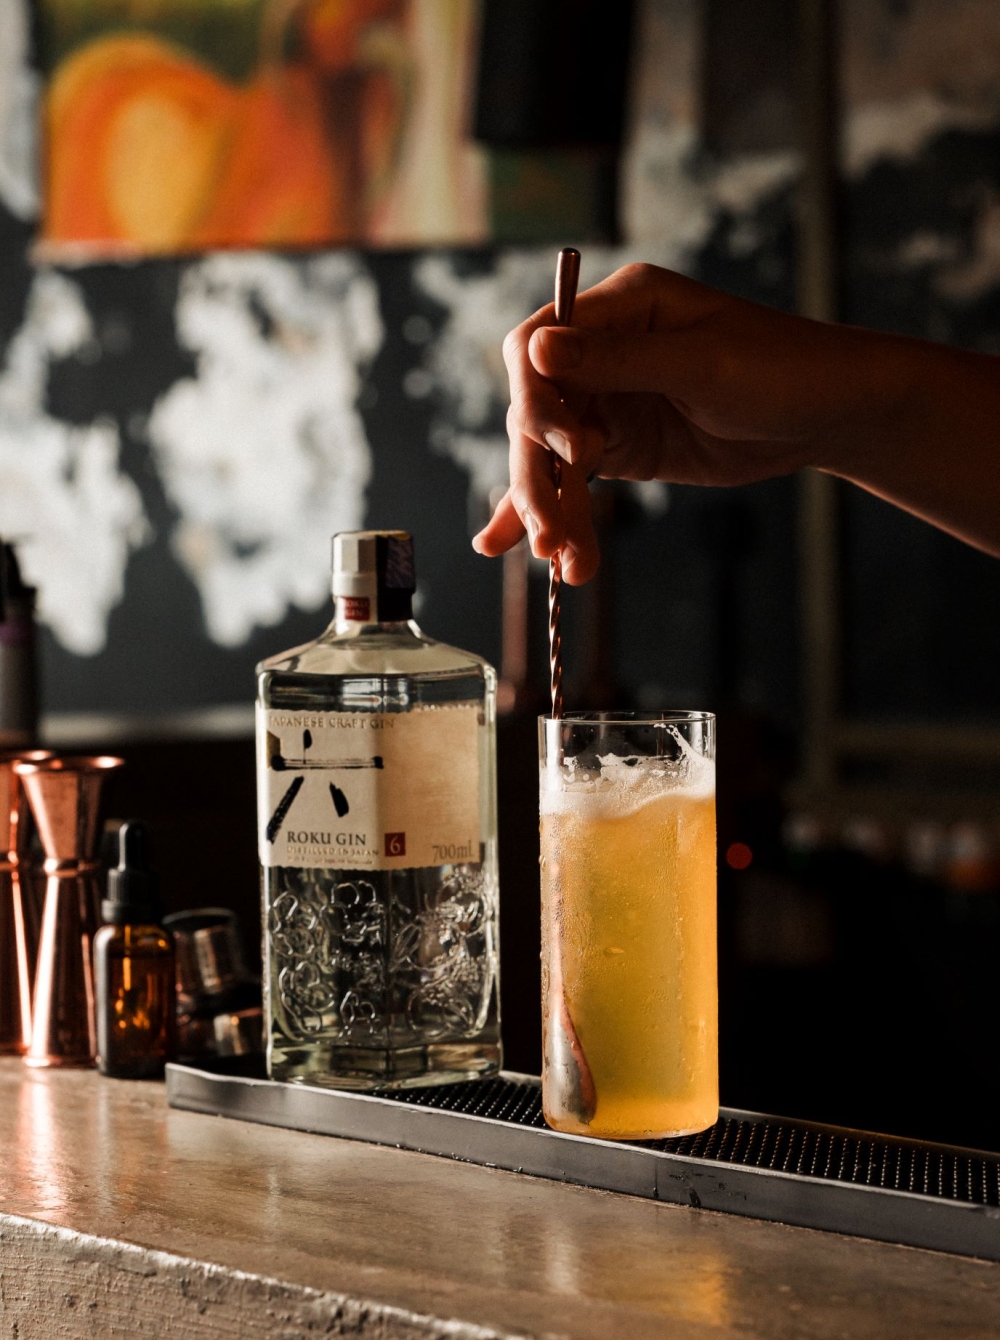 Cocktails & Shots will introduce 'Not A Beer', a unique concoction that combines Thai green tea-infused Roku Gin with condensed milk, lemon juice, coconut milk and a touch of orange liqueur. — Picture courtesy of Penang Cocktail Week